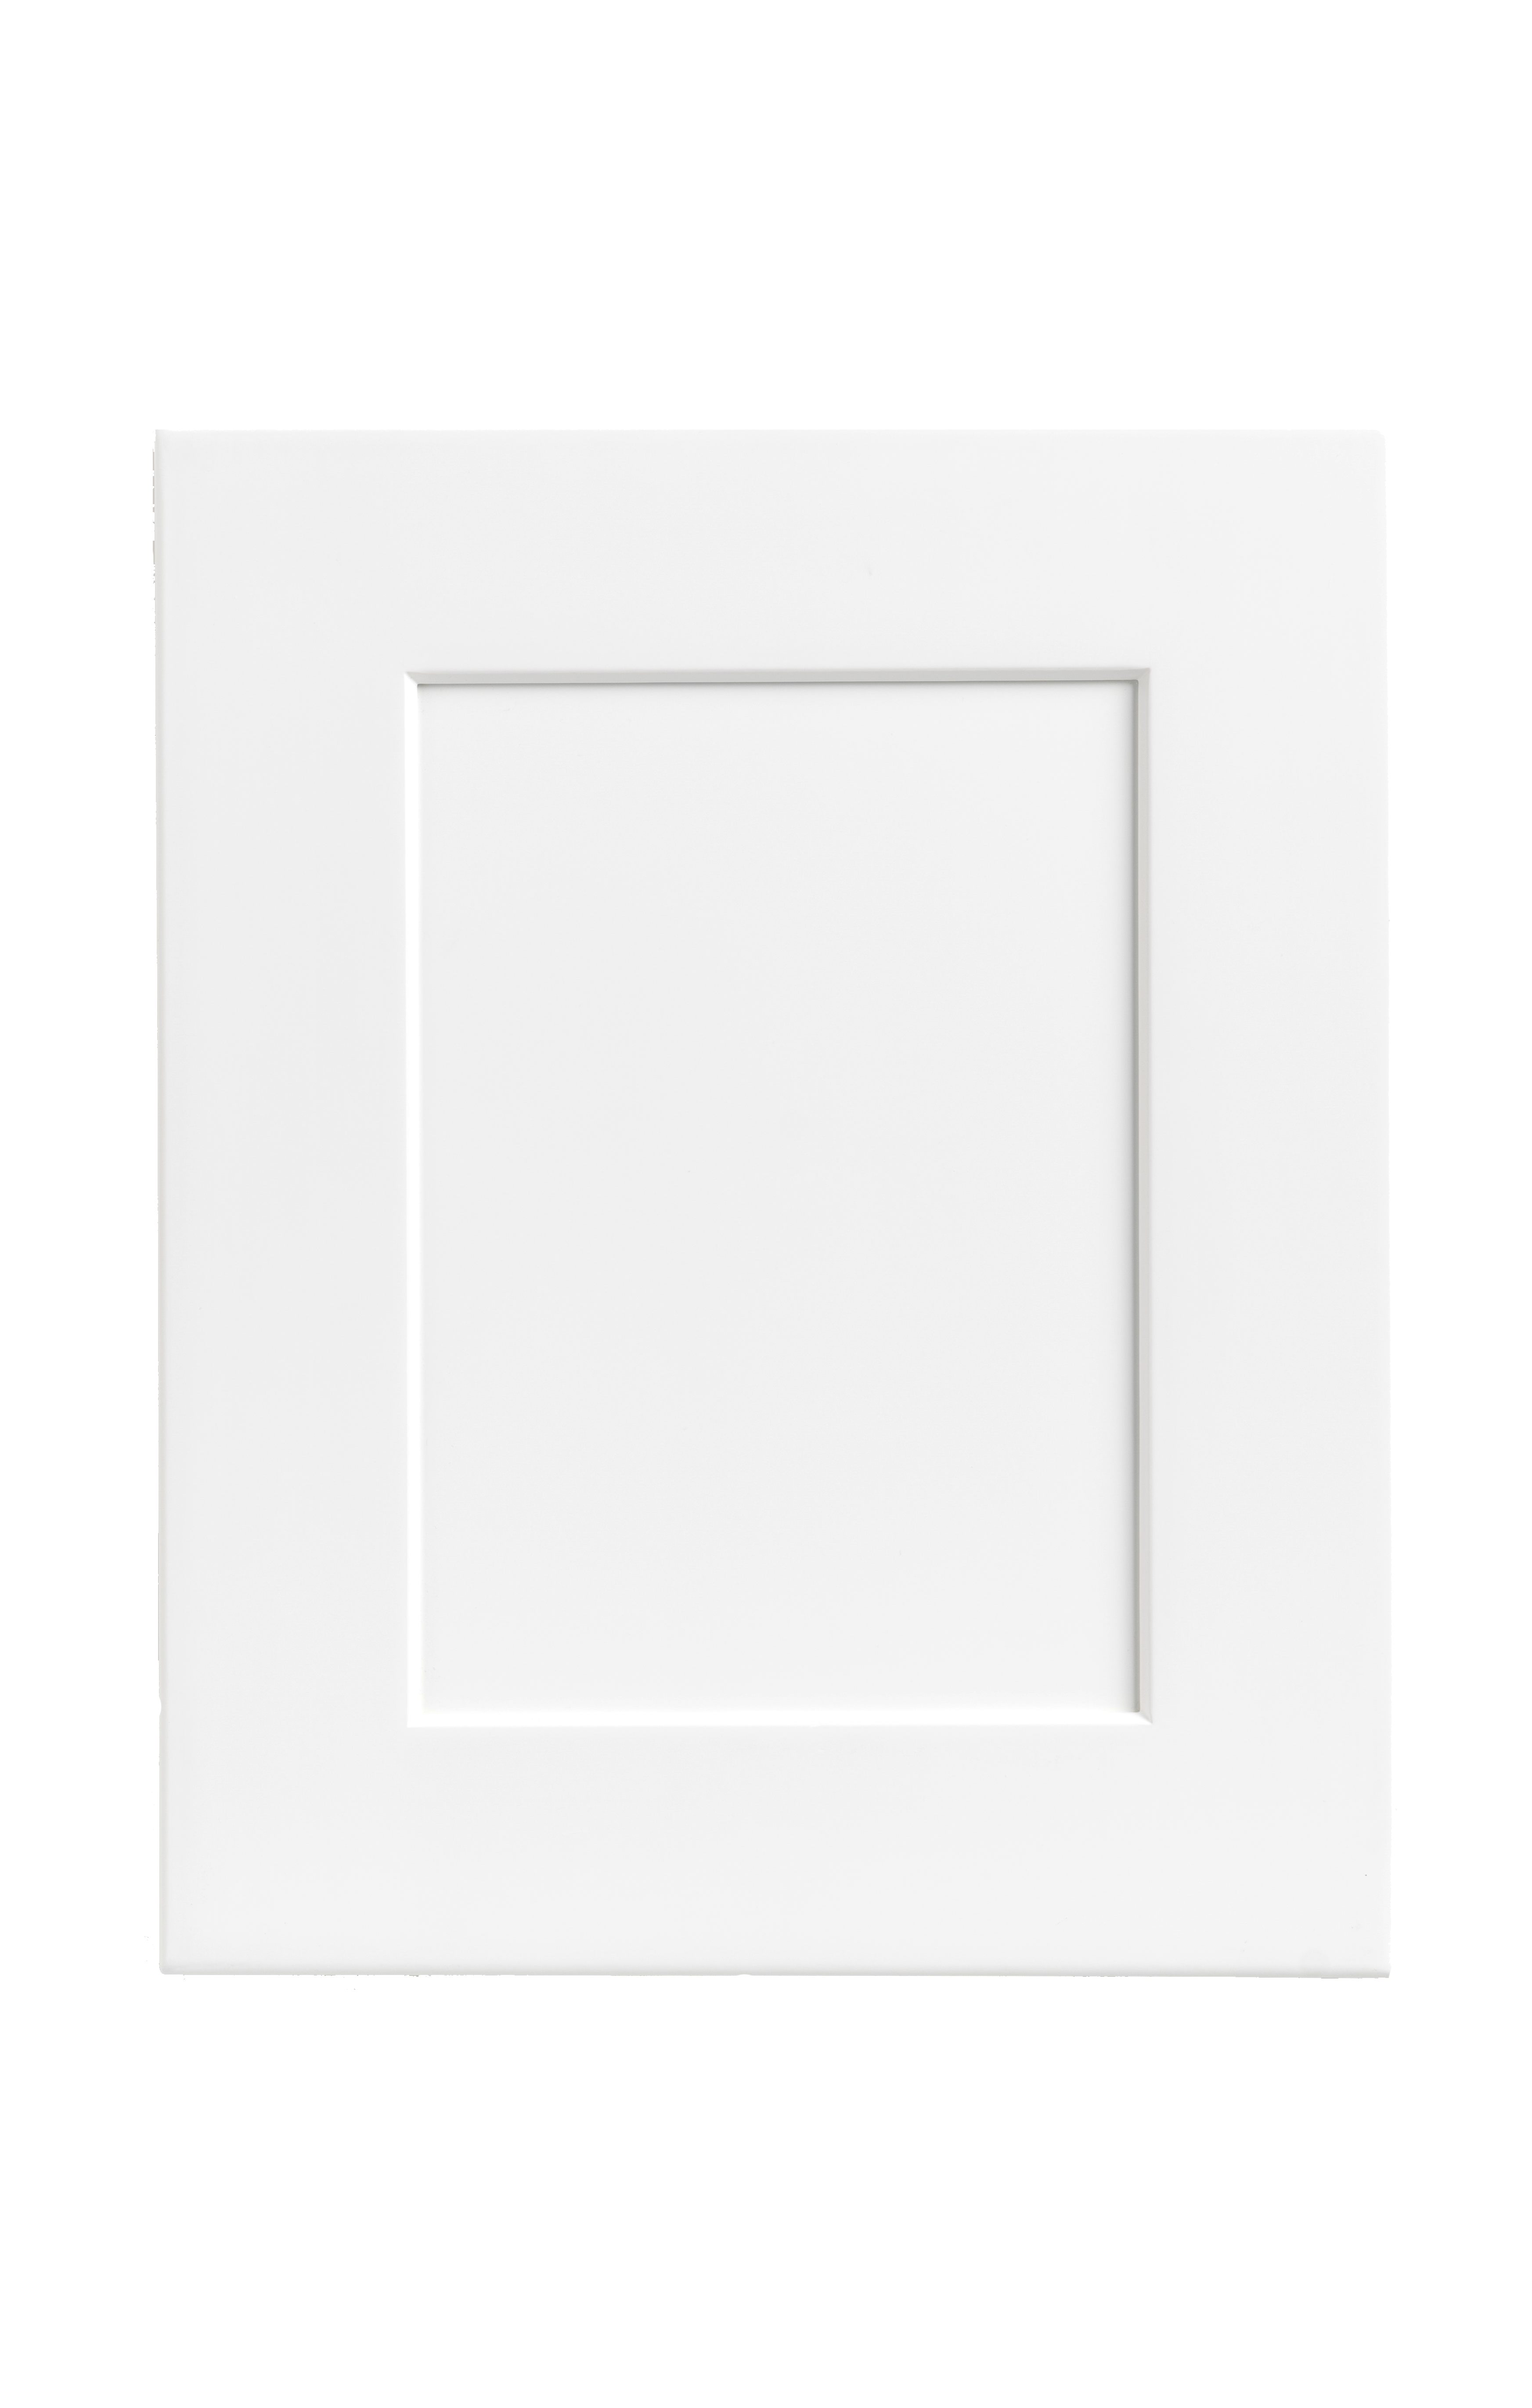 Diagonal Corner White Shaker 1/2" Overlay Wall Cabinet 24" Wide by 30", 36" & 42" Tall - RTA Wholesalers